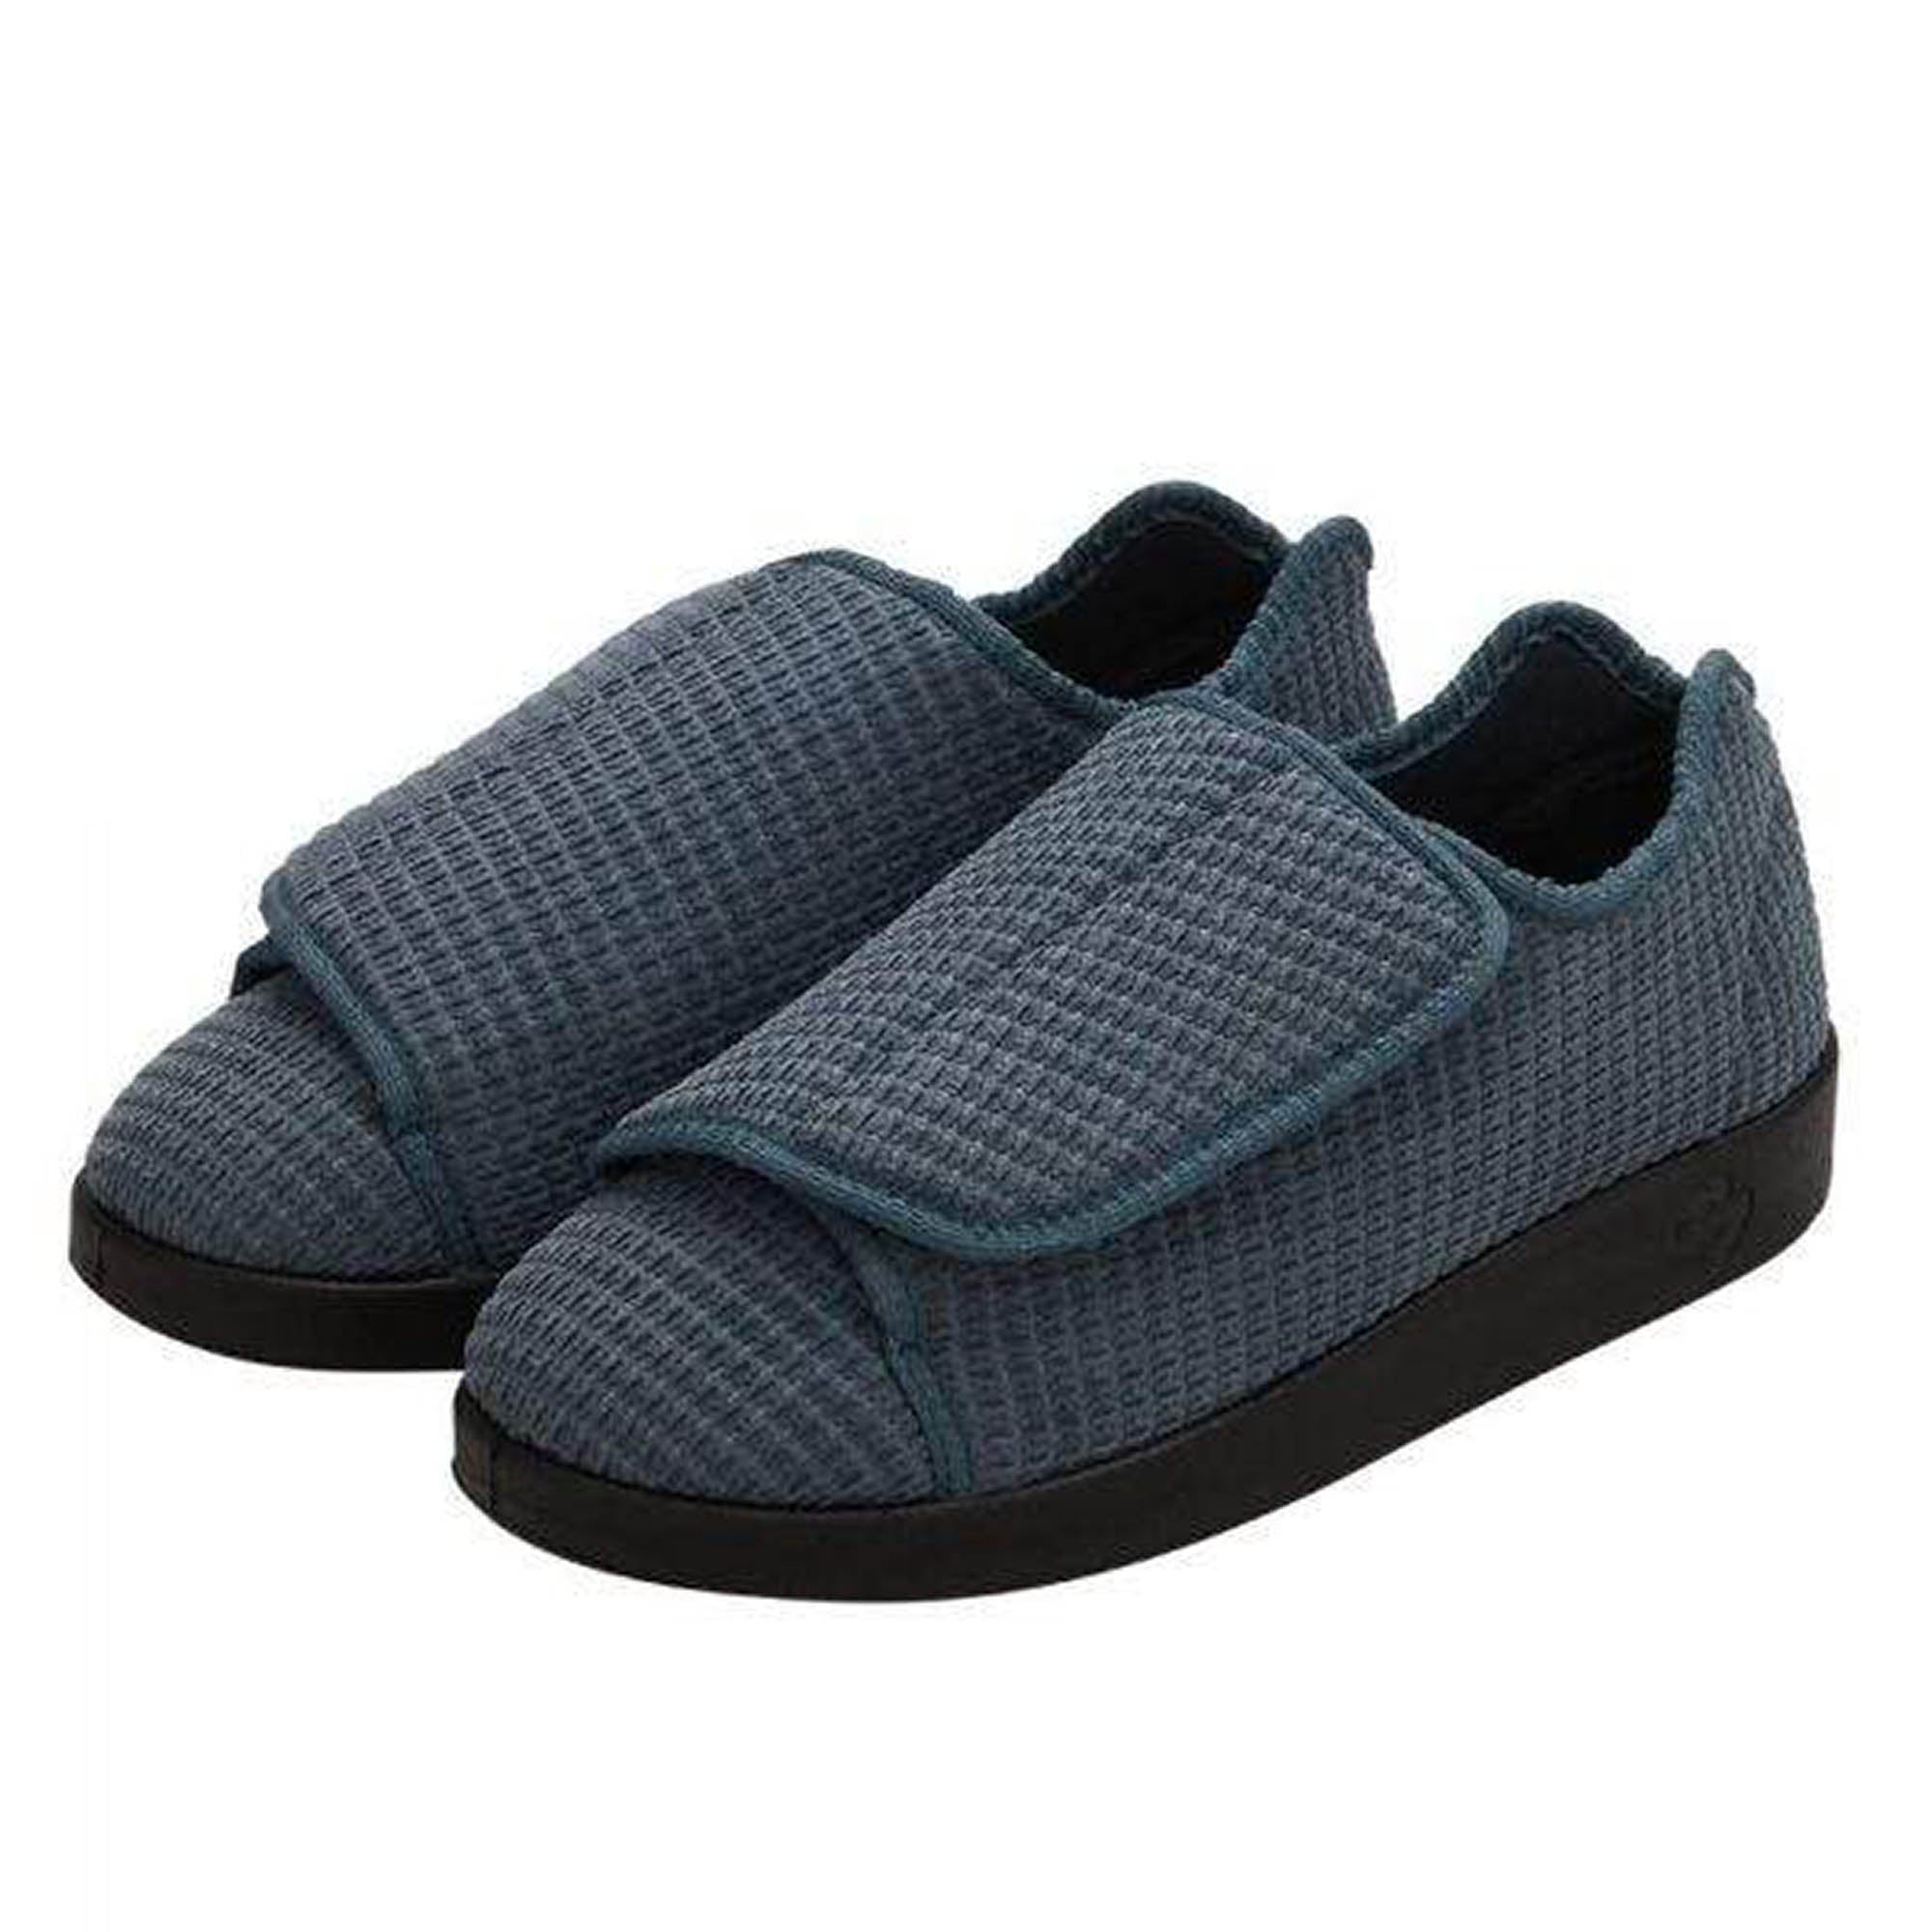 Silverts Men's Extra Extra Wide Slip-Resistant Slippers - Steel - 7